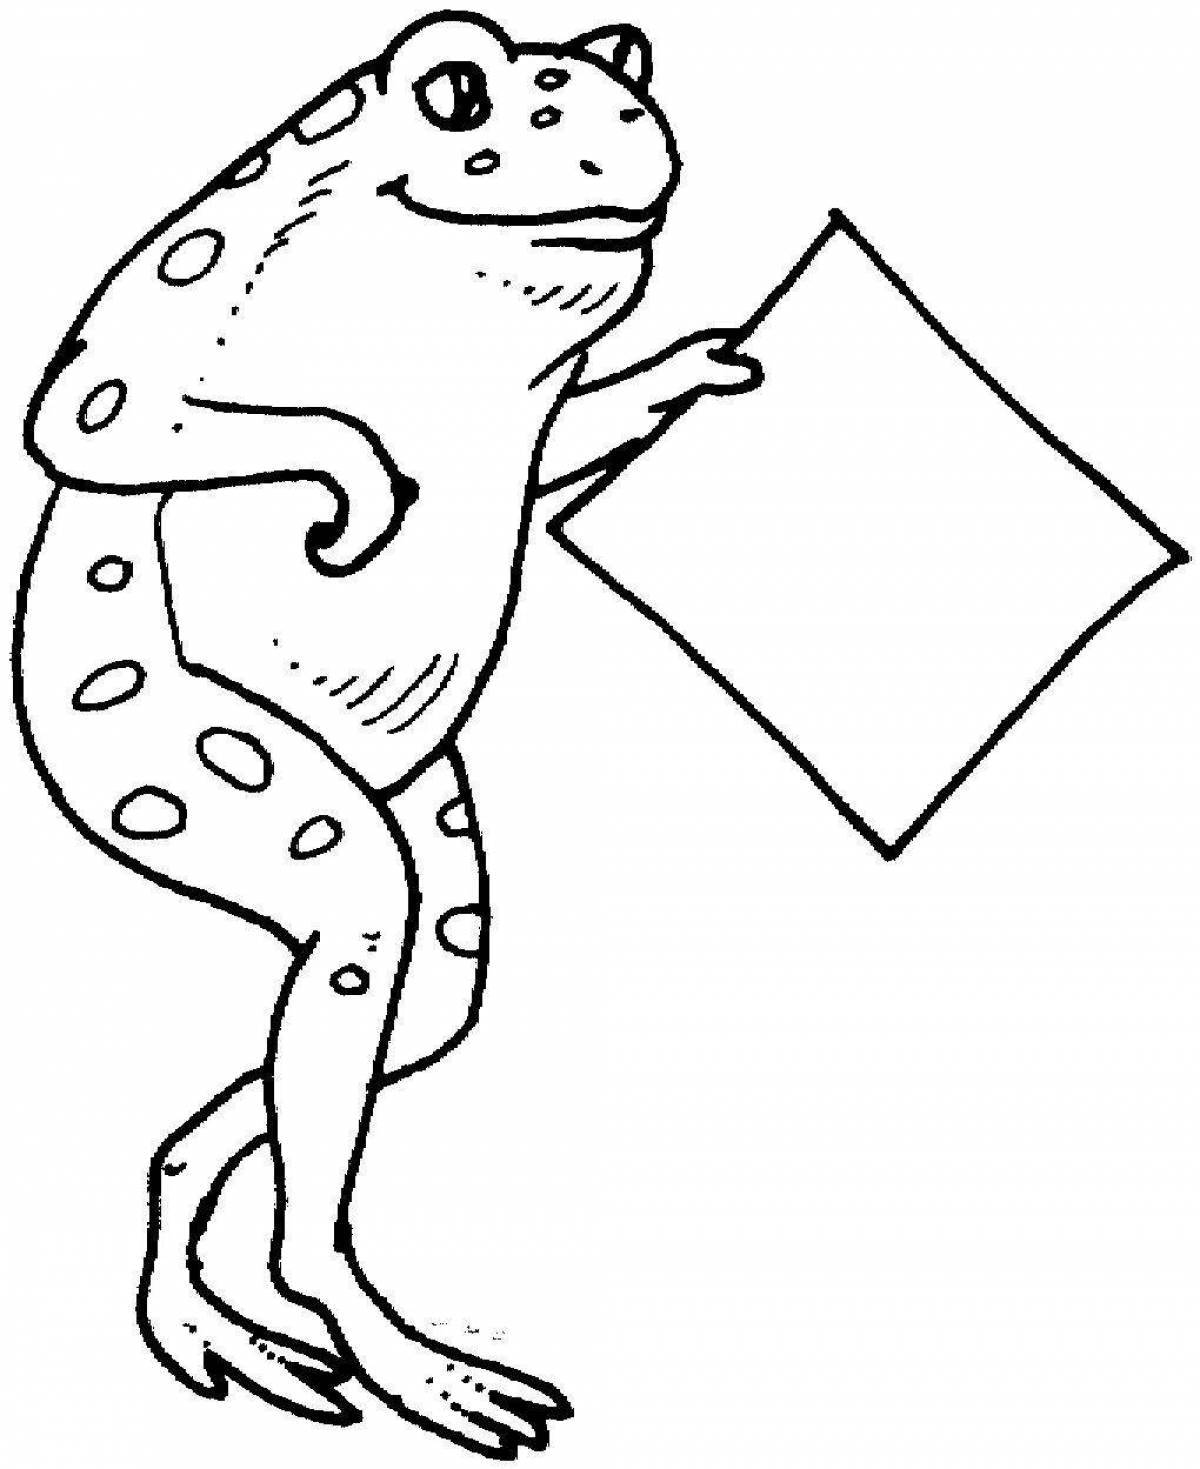 Froggy's funny coloring book